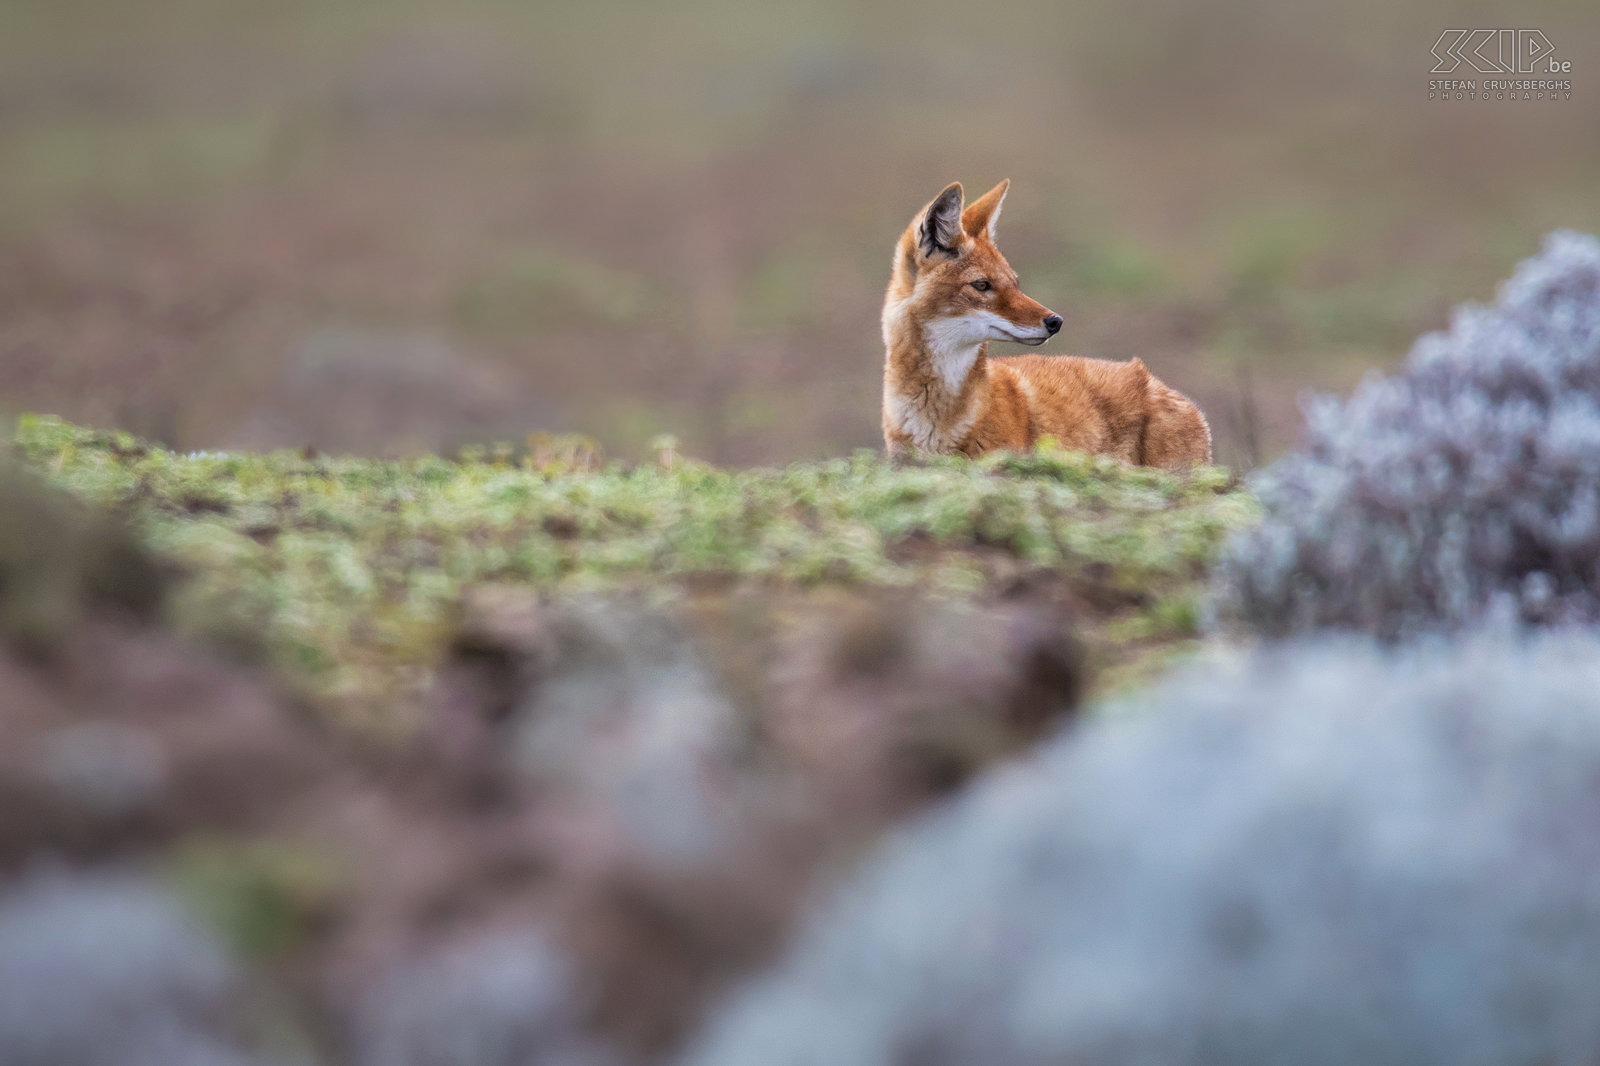 Bale Mountains - Sanetti - Ethiopian wolf These unusual wolves are highly social and live in family packs, but hunt solitarily for Afroalpine rodents.  Stefan Cruysberghs